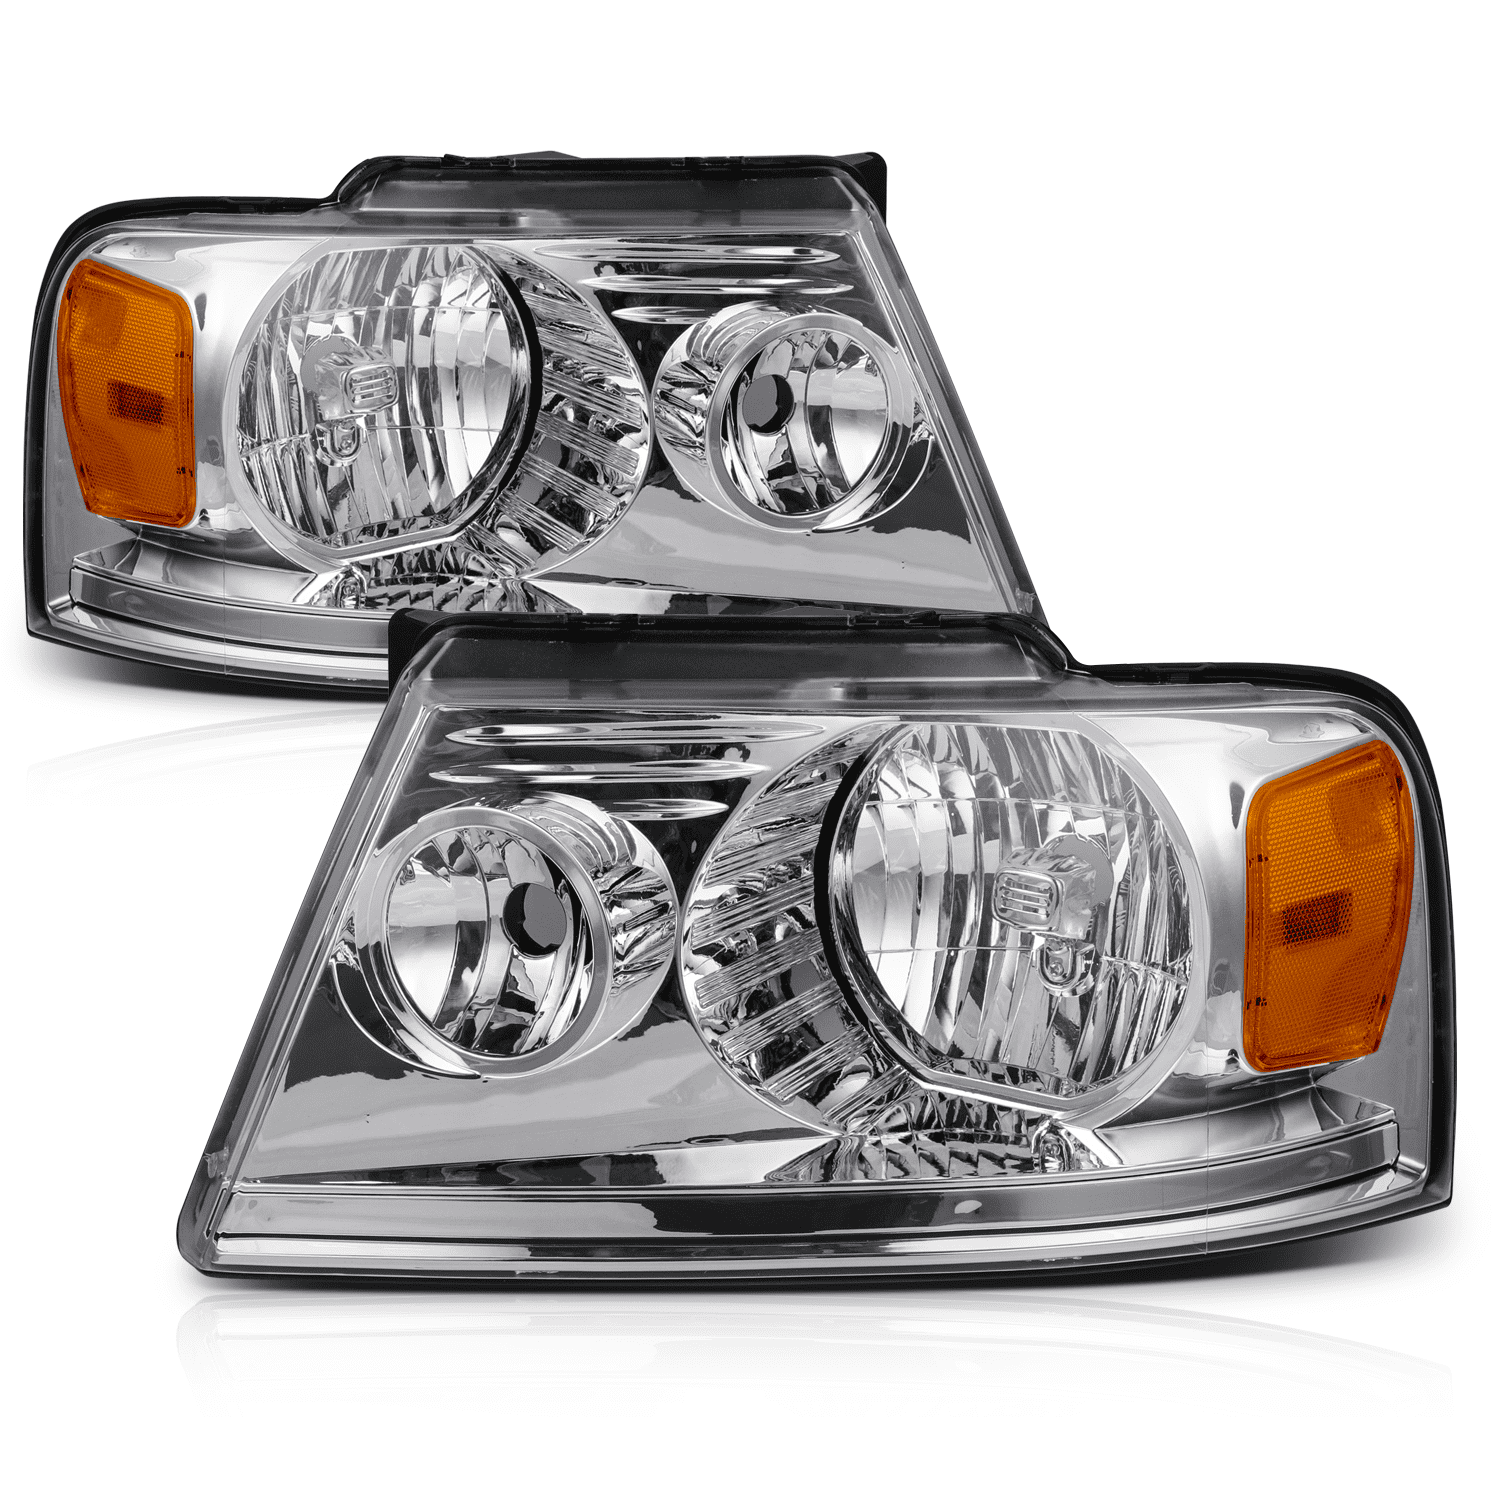 M-AUTO L&R Headlights Assembly for 2004-2008 Ford F-150 / 2006